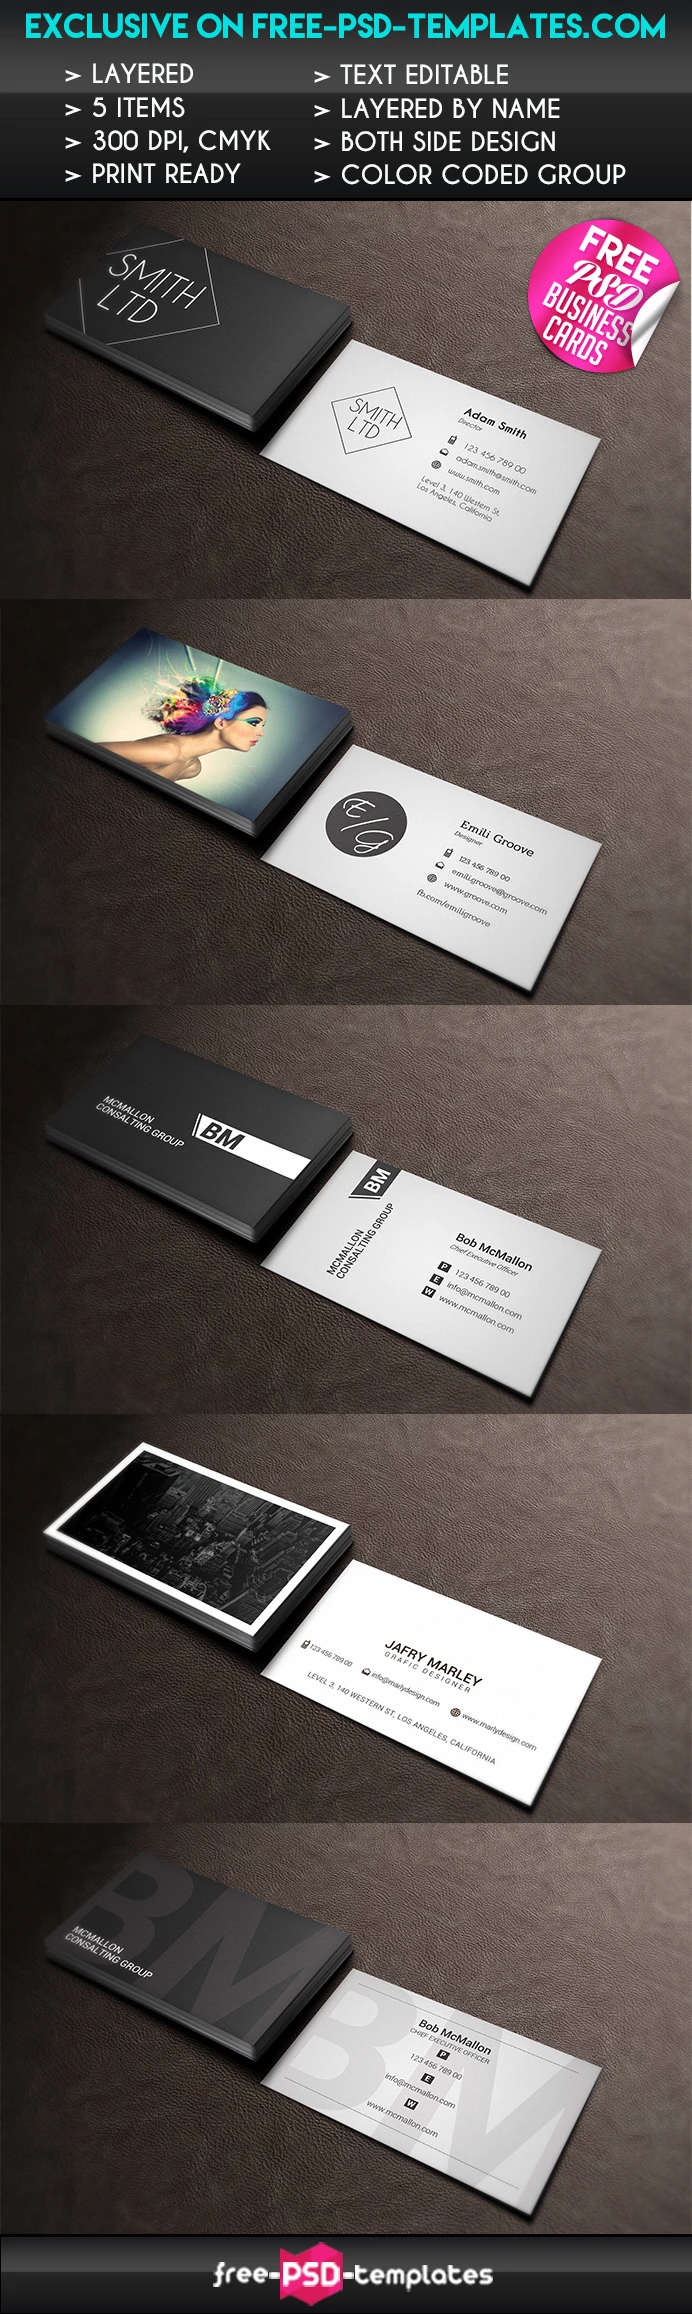 Preview_Business_Cards